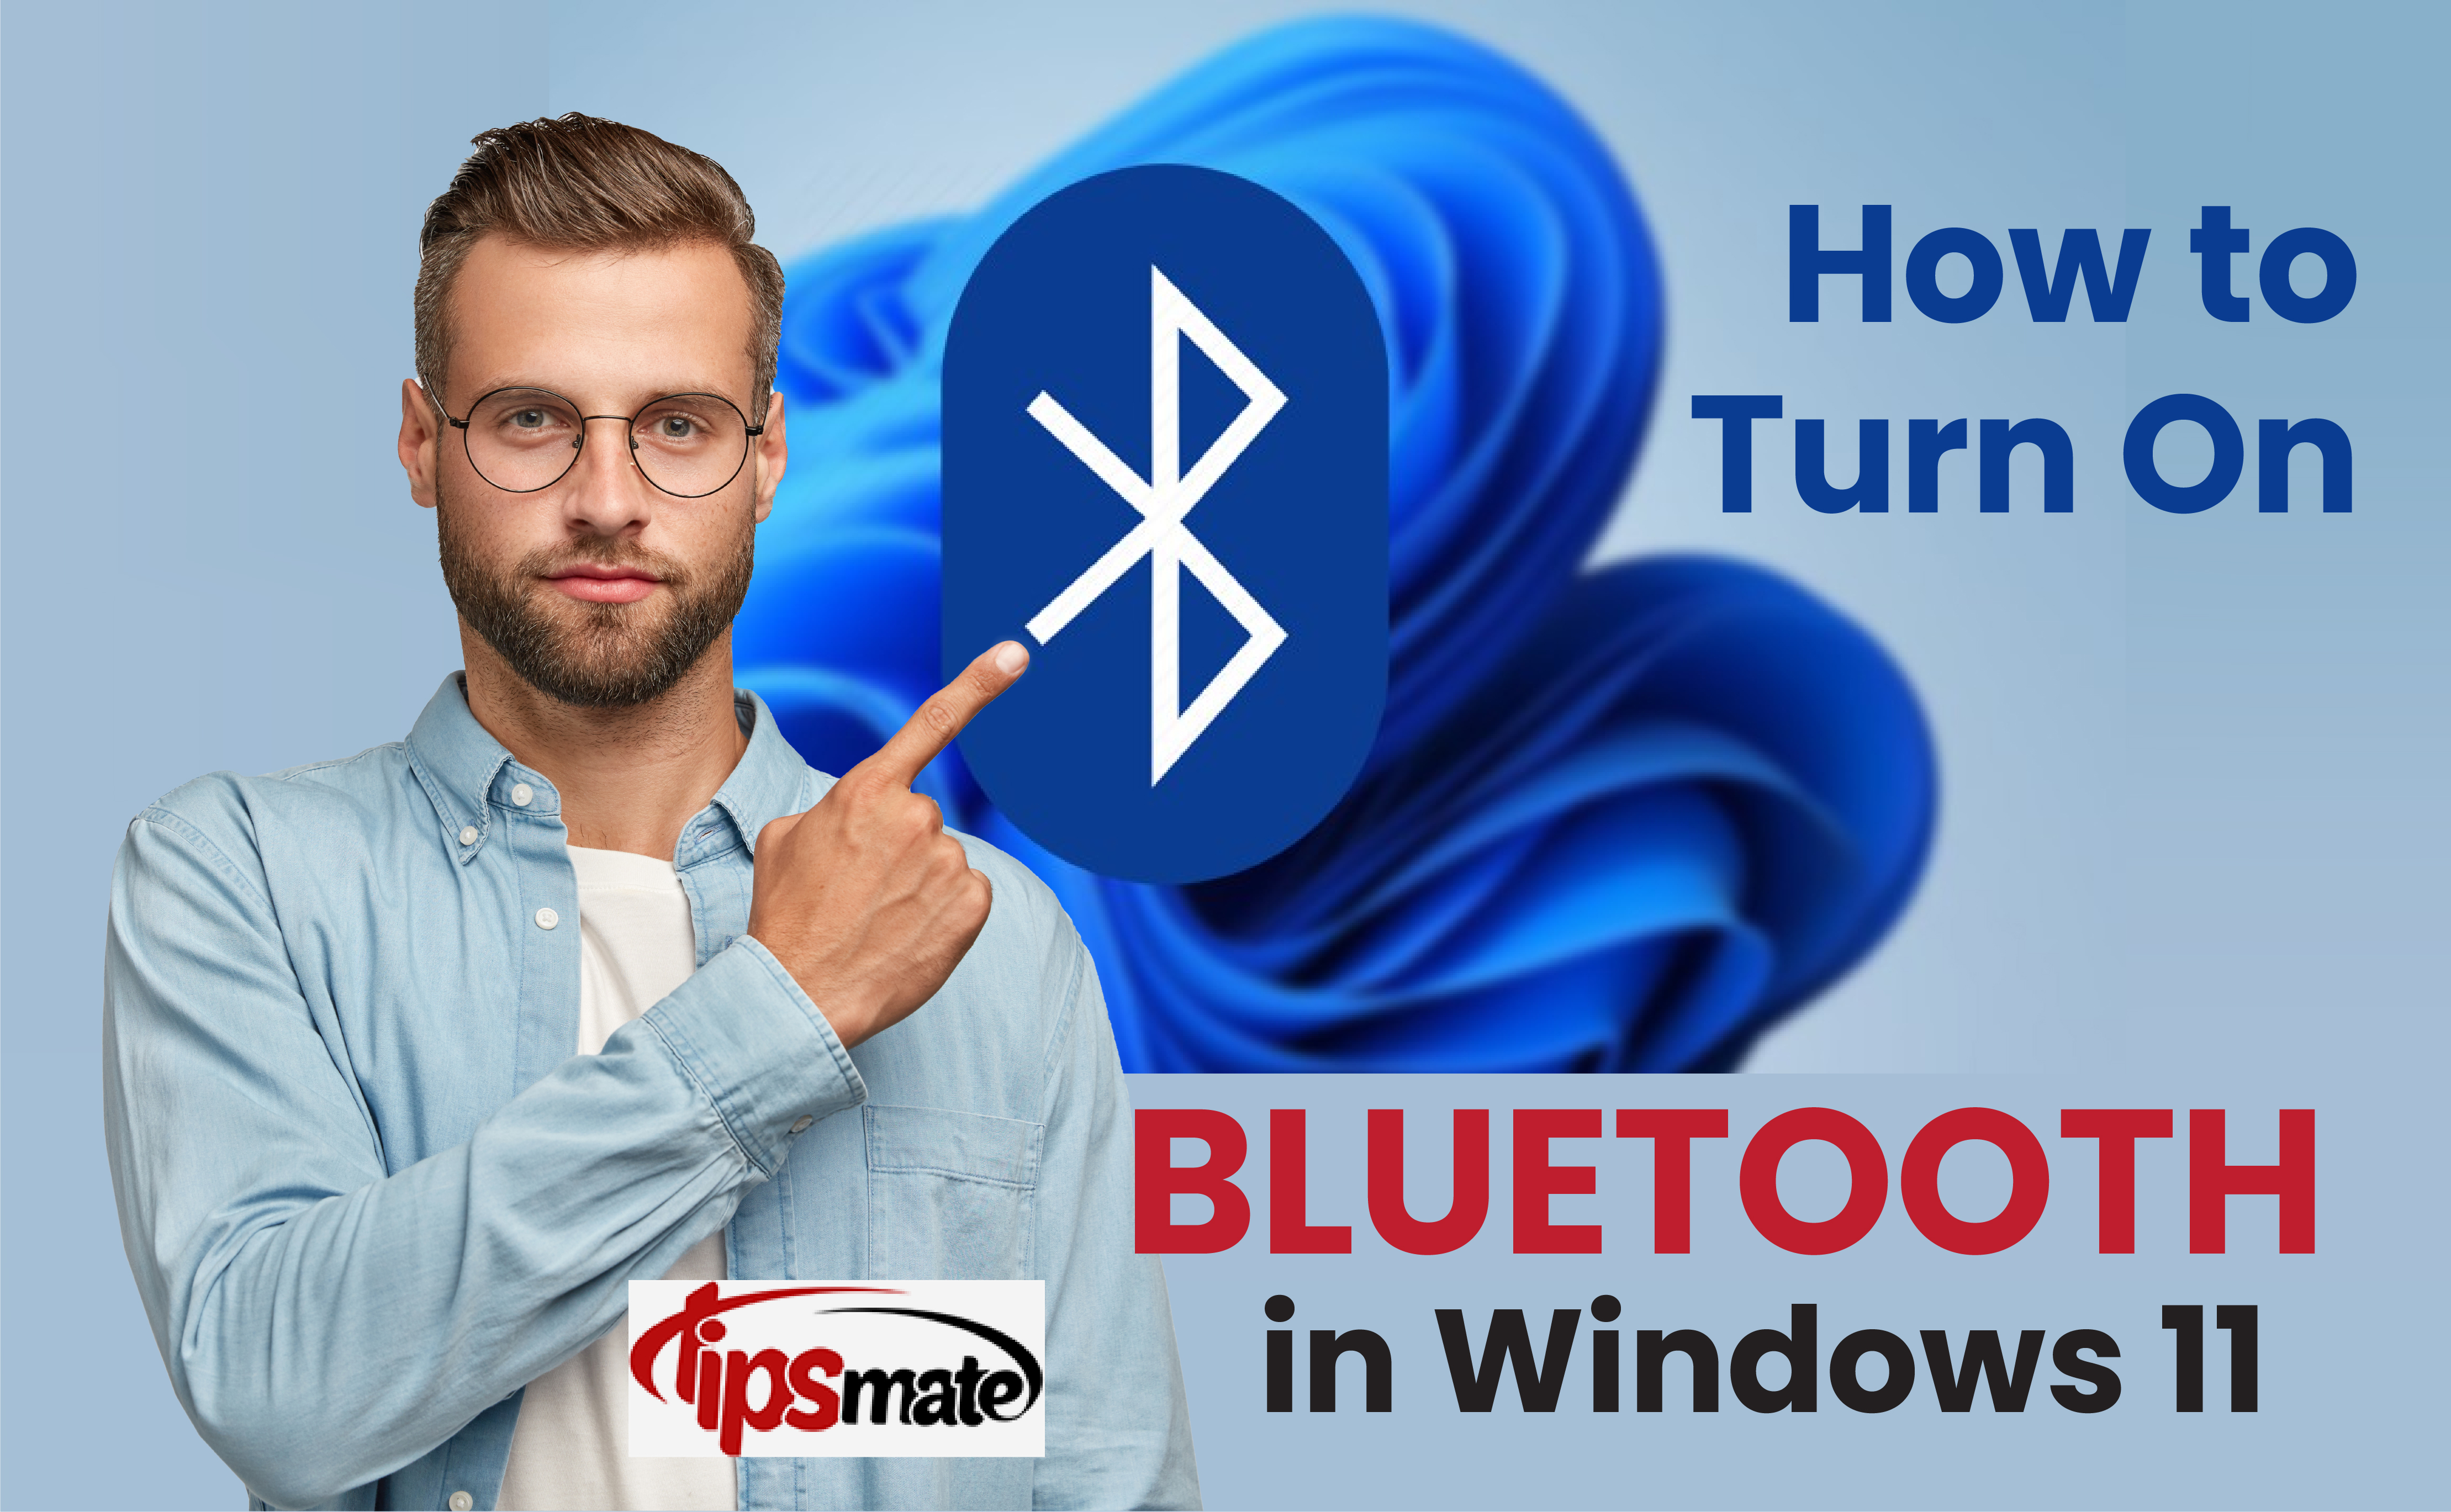 How to Turn On Bluetooth in Windows 11?